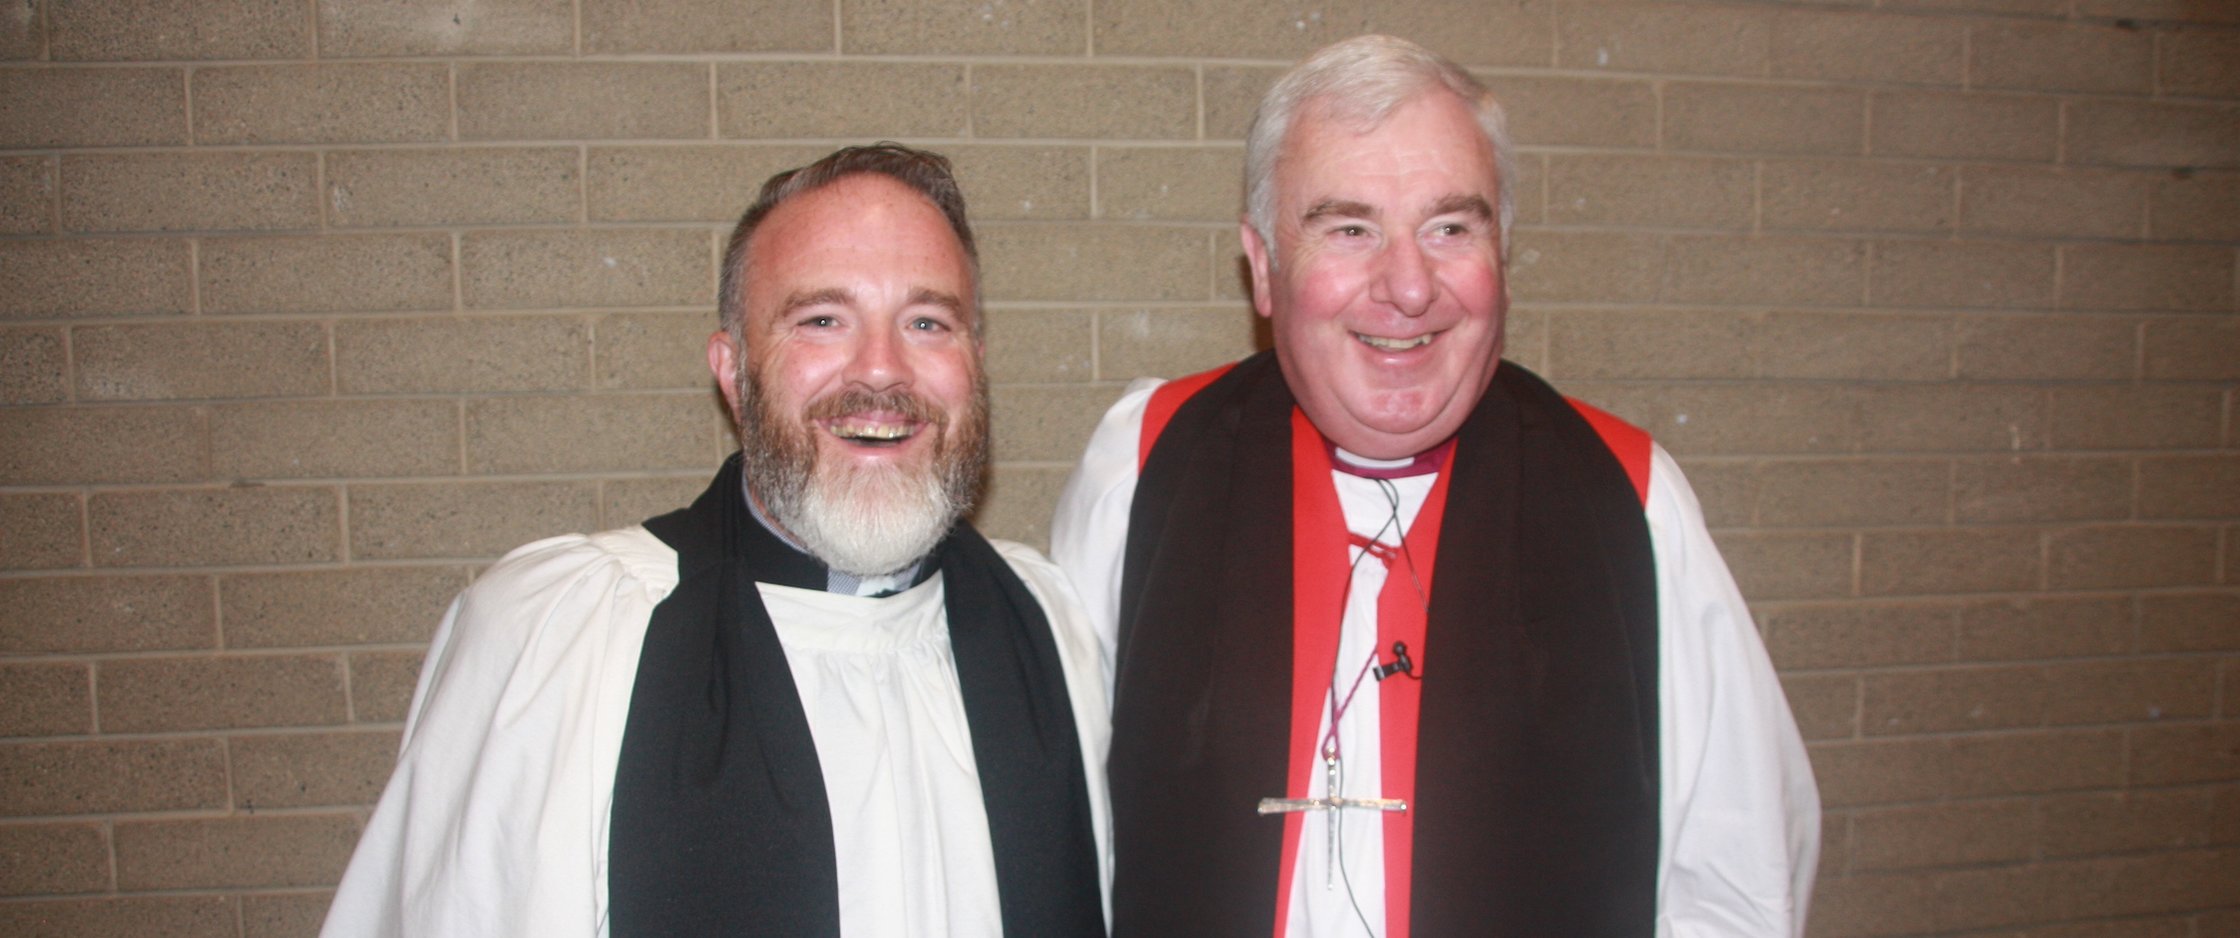 Andrew Frame is ordained (OLM) deacon